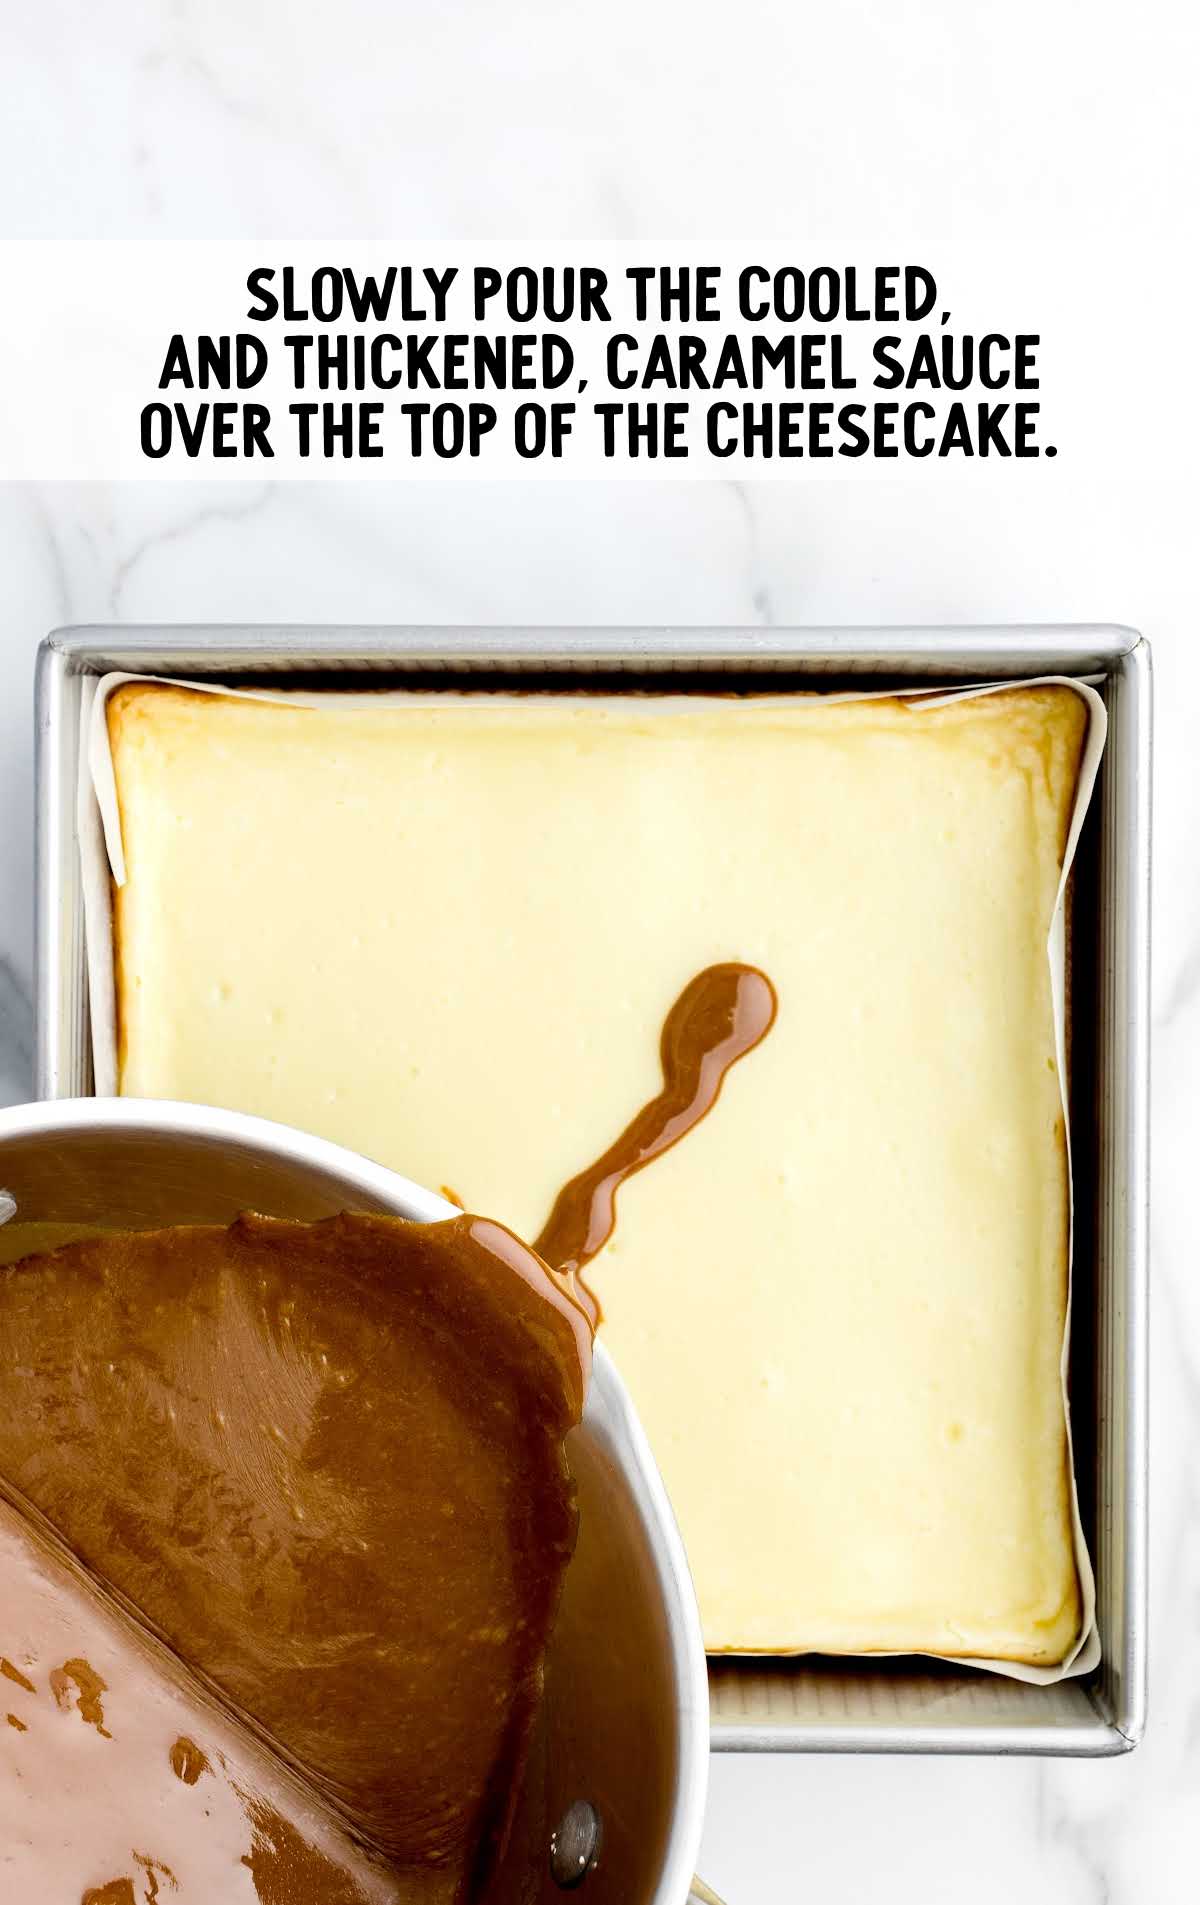 caramel sauce poured over the top of cheesecake